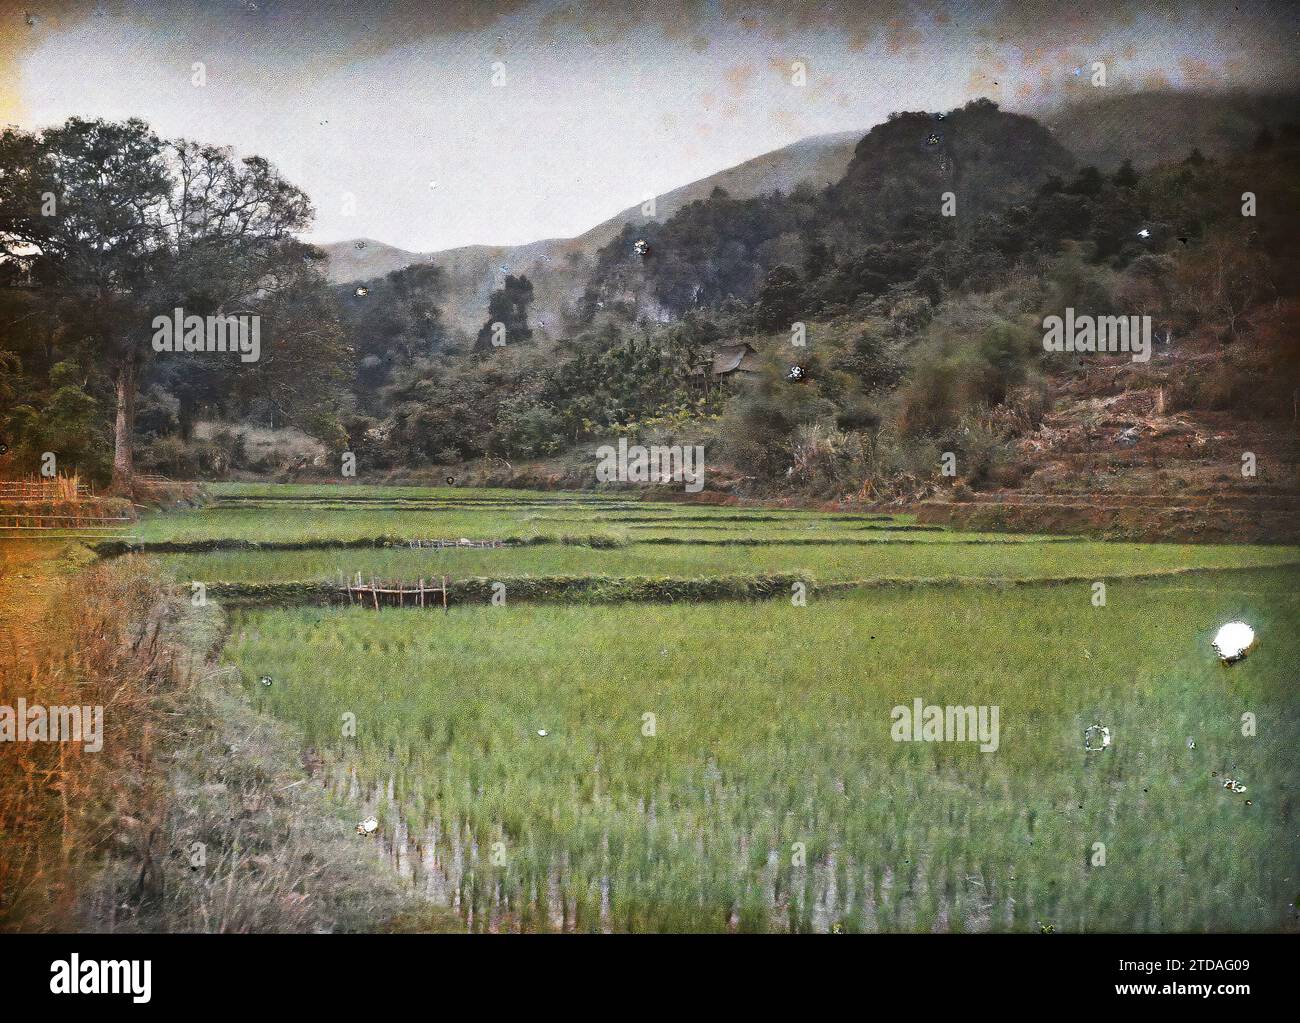 Province of Hoa-binh, Tonkin, Indochina A rice field at the foot of the rocks, on which we can see a Mnong hut, Nature, Environment, Economic activity, Society, Habitat, Architecture, Landscape, Mount, mountain, Rice field, Agriculture, breeding, Minority ethnic, Housing, Indochina, Tonkin, From Hanoi to Chobõ, Black River, Between Hanoi to Hoabinh, Mnong Case in the rocks, Hoa-Binh [région], 06/03/1916 - 08/03/1916, Busy, Léon, Léon Busy photographer en Indochine, Autochrome, photo, Glass, Autochrome, photo, Positive, Horizontal, Size 9 x 12 cm Stock Photo